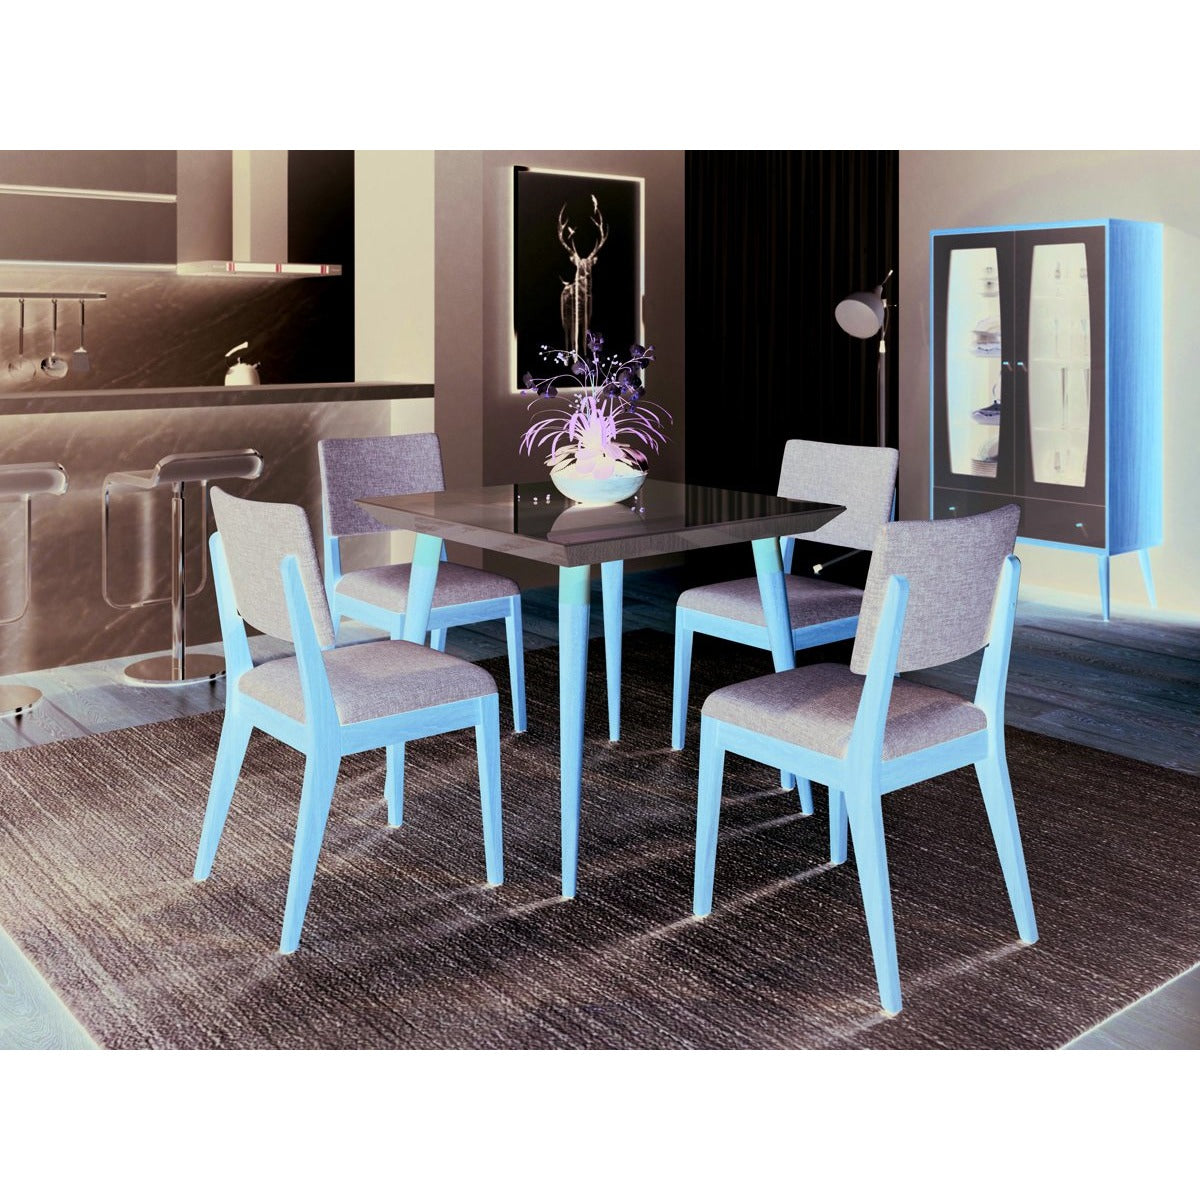 Manhattan Comfort 5-Piece Utopia 35.43" and Dover Dining Set with 4 Dining Chairs in Off White and Grey-Minimal & Modern